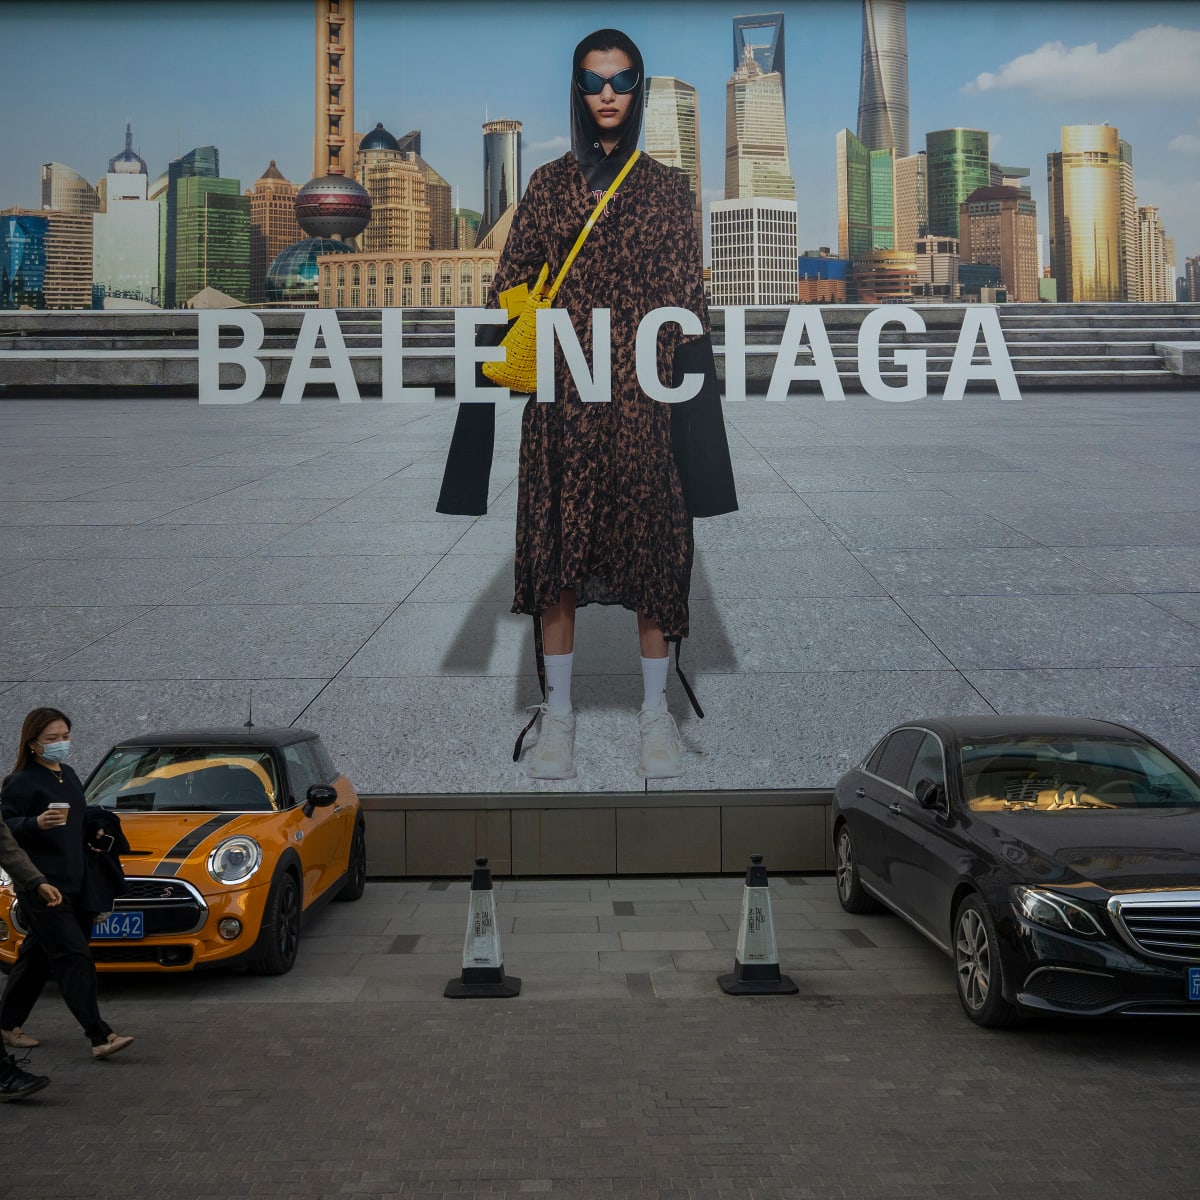 Droop forhistorisk respekt Balenciaga Drops Out of Lyst's Top 10 Hottest Brands Ranking - Fashionista